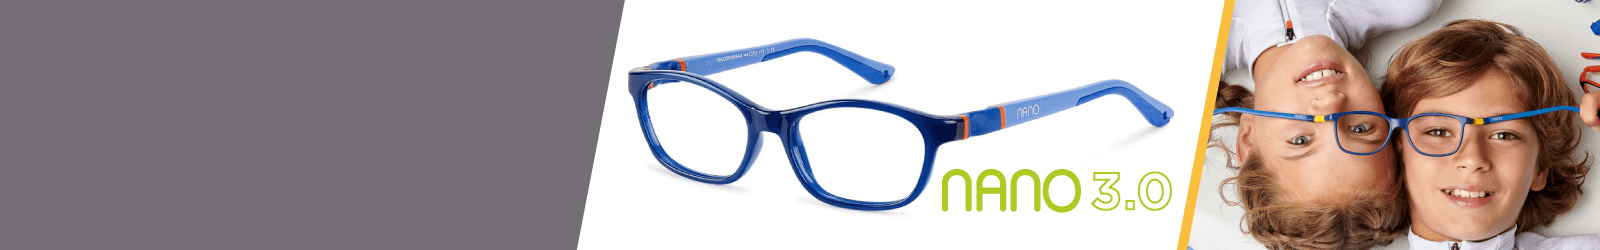 Nano 3.0 Indestructible Eyewear for Kids from 6 to 8-year-old